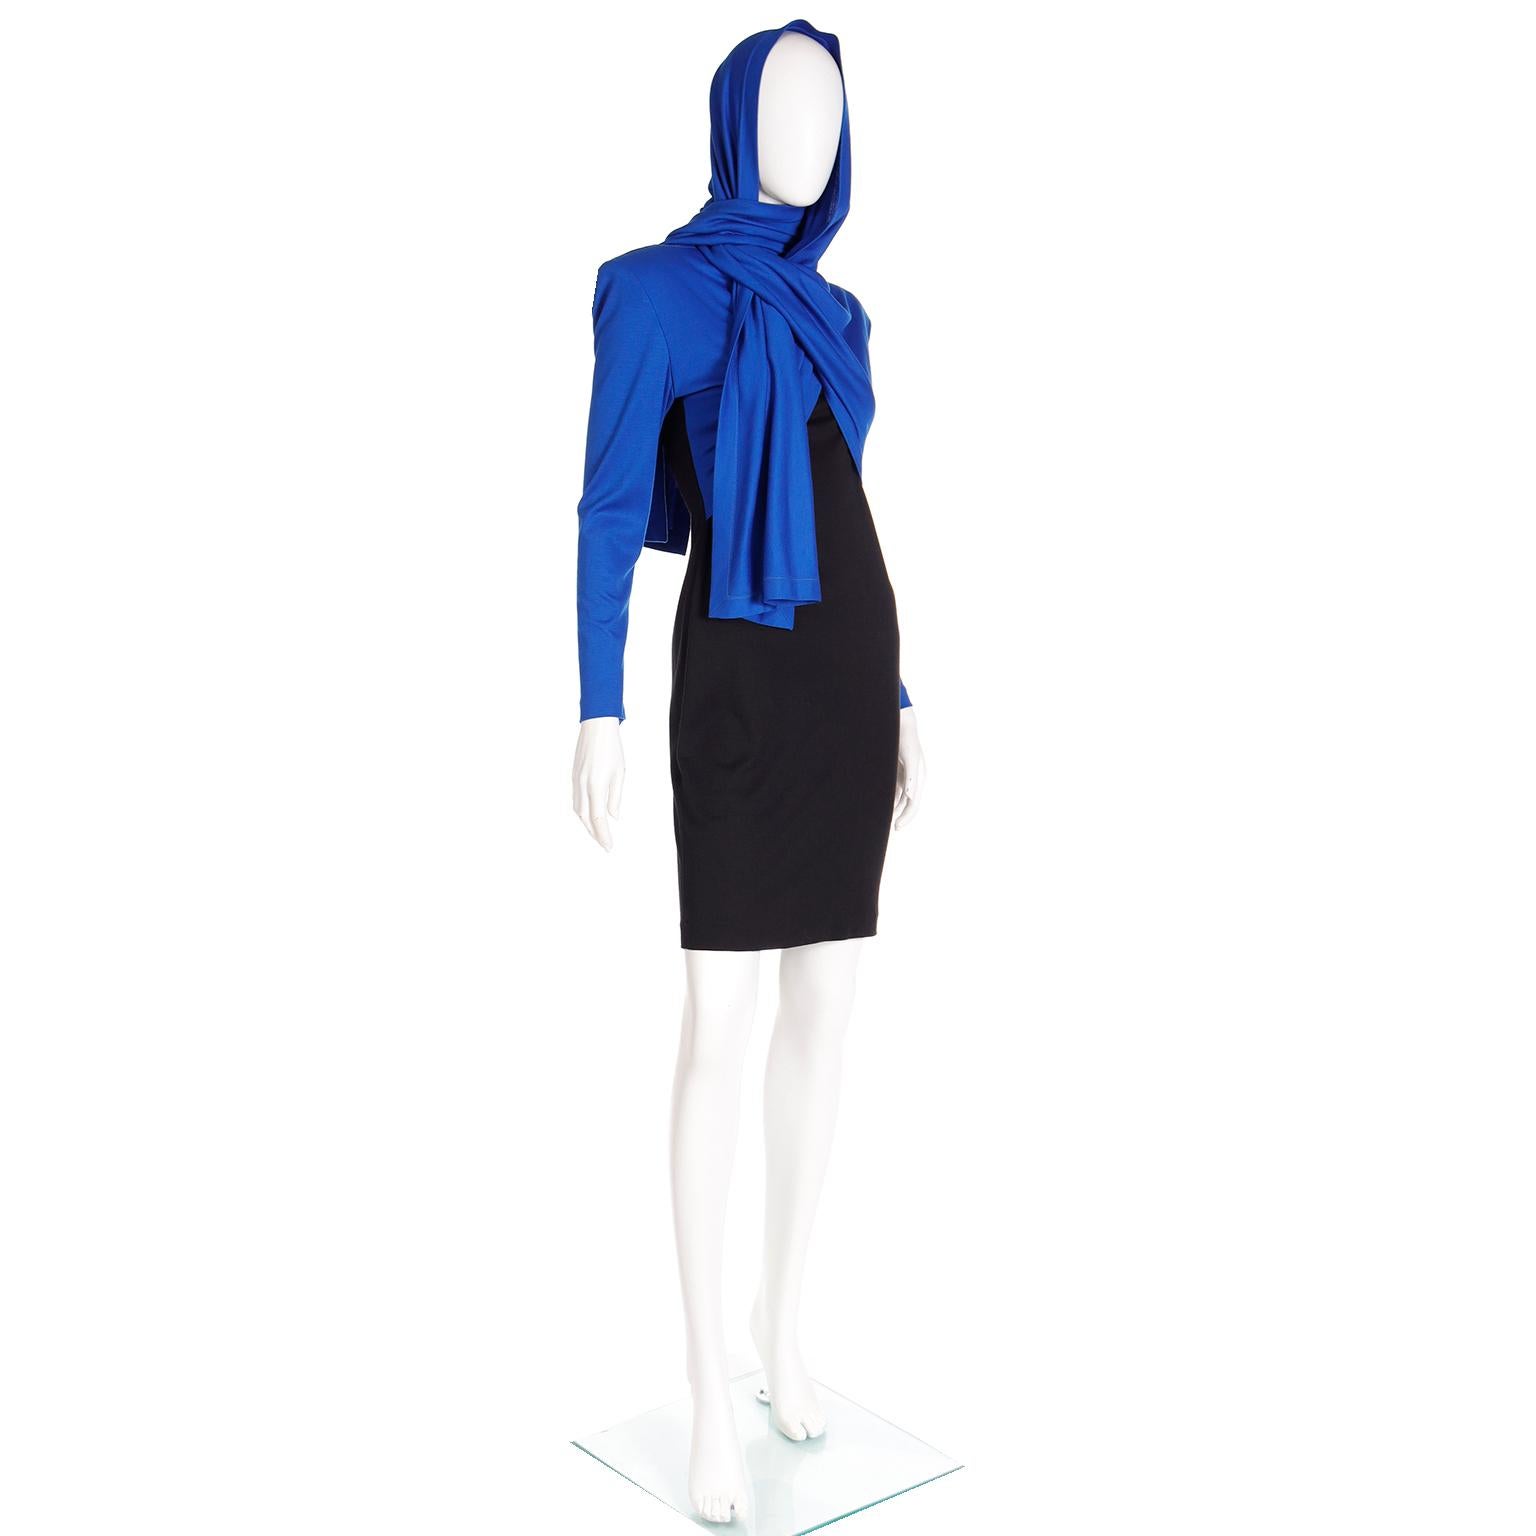 FW 1989 Patrick Kelly Runway Dress in Blue & Black Knit with Head Scarf  For Sale 1